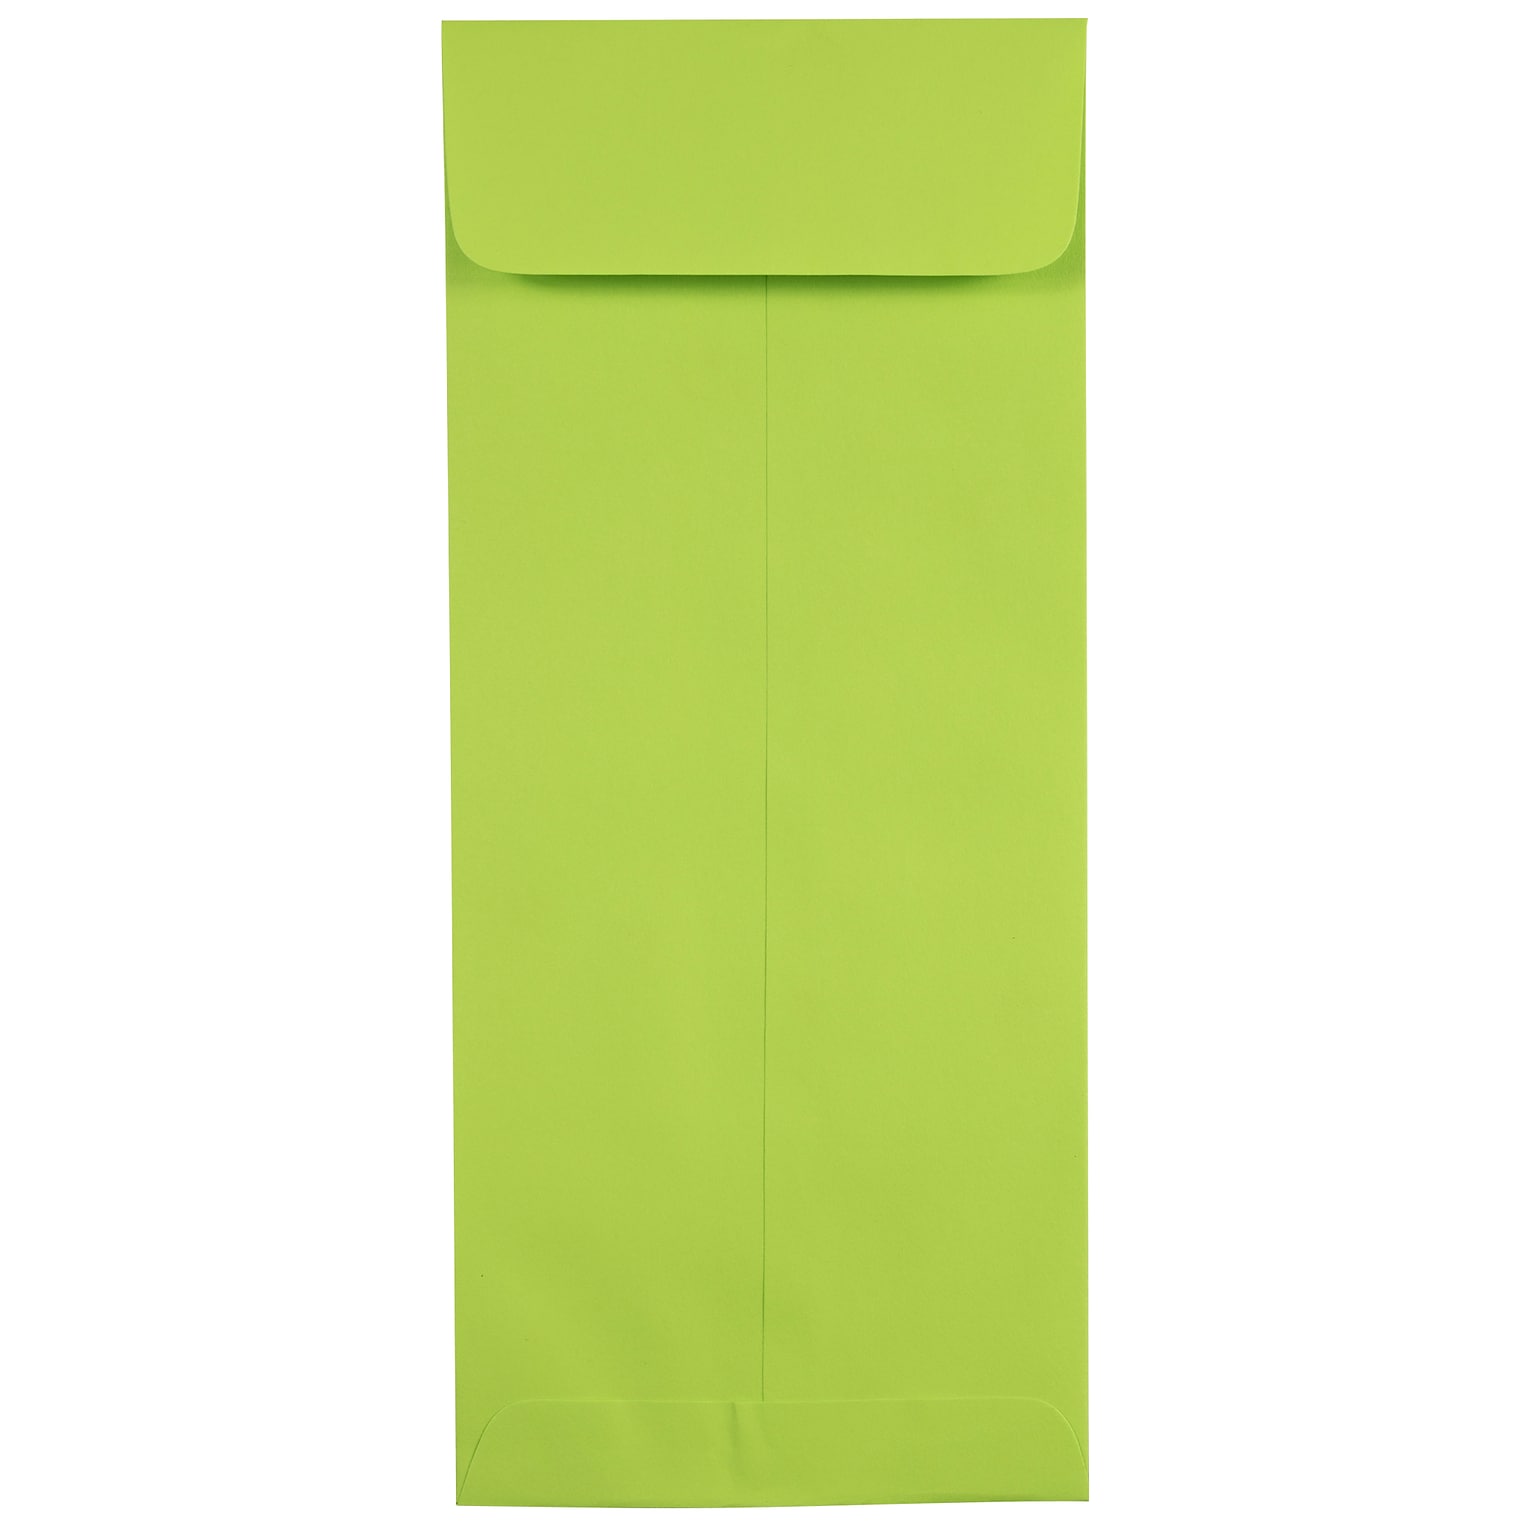 JAM Paper Open End #10 Currency Envelope, 4 1/8 x 9 1/2, Ultra Lime Green Brite Hue, 50/Pack (15870I)